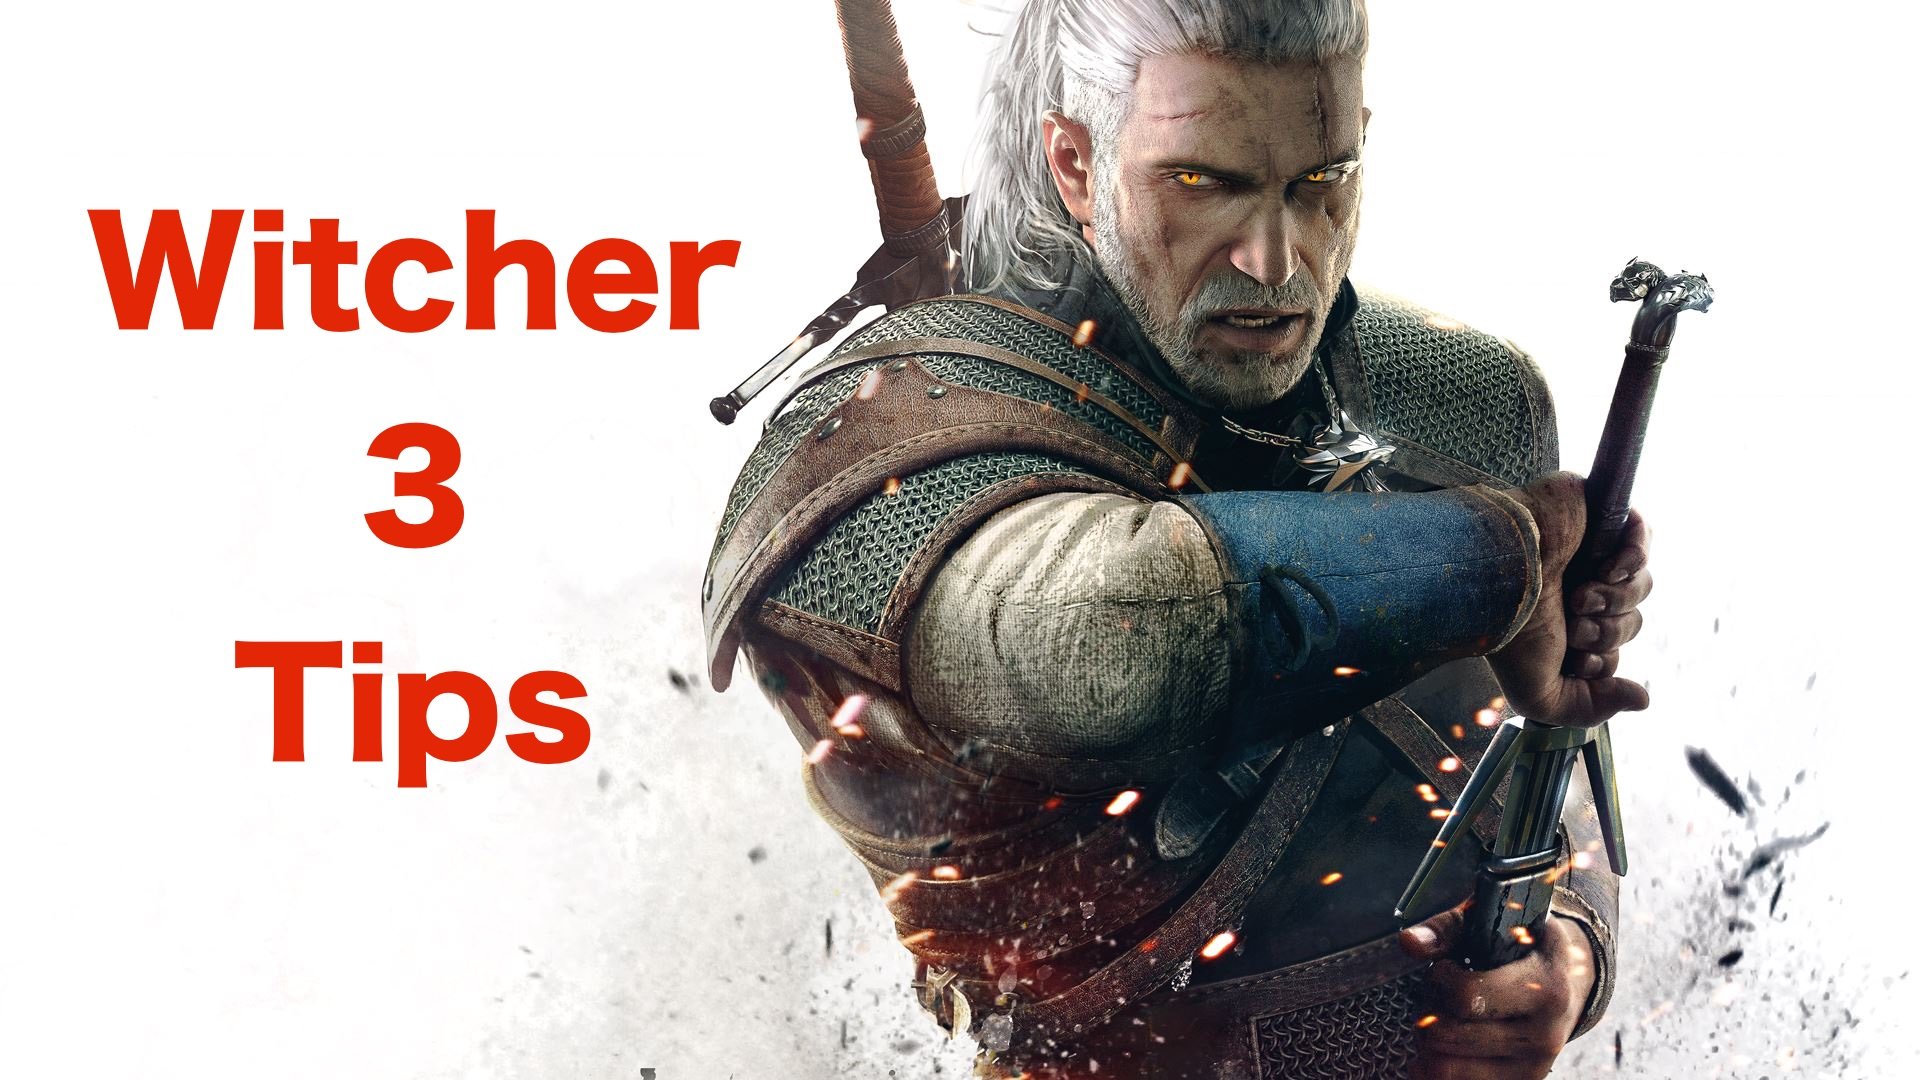 Level up faster with these Witcher 3 tips and tricks.